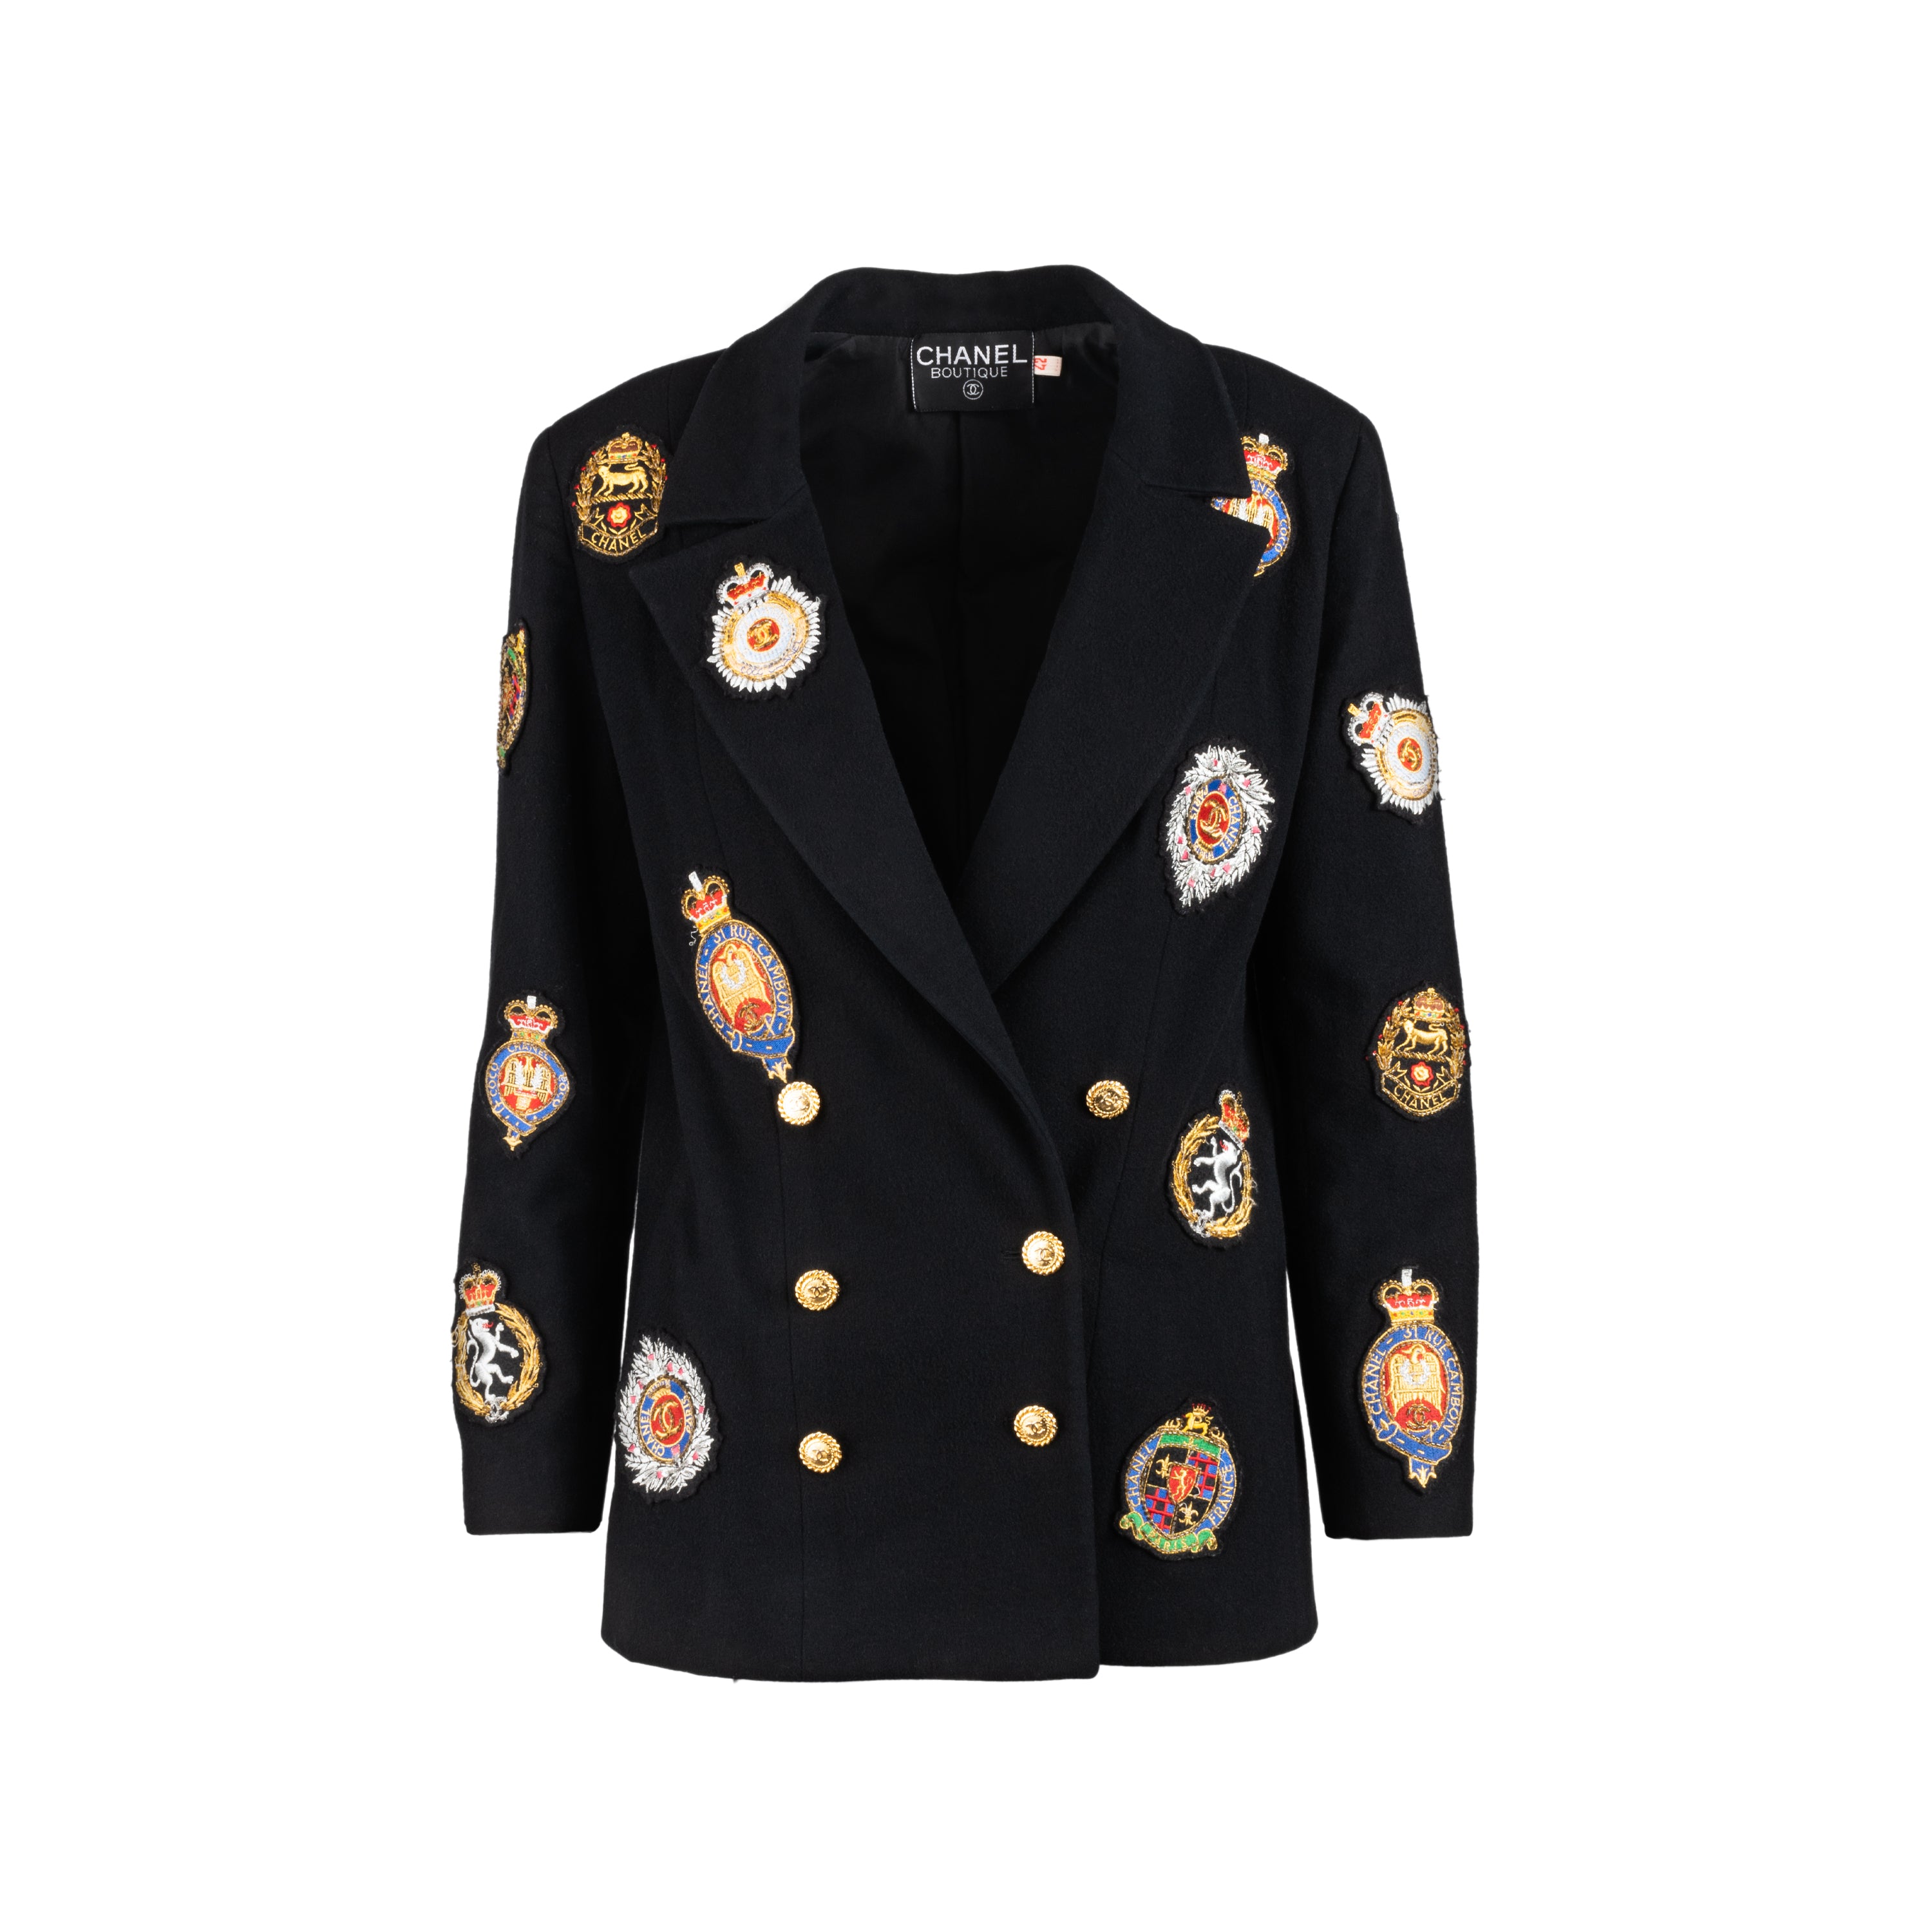 Chanel Double Breasted Jacket With Crest/Patch Details - '80s